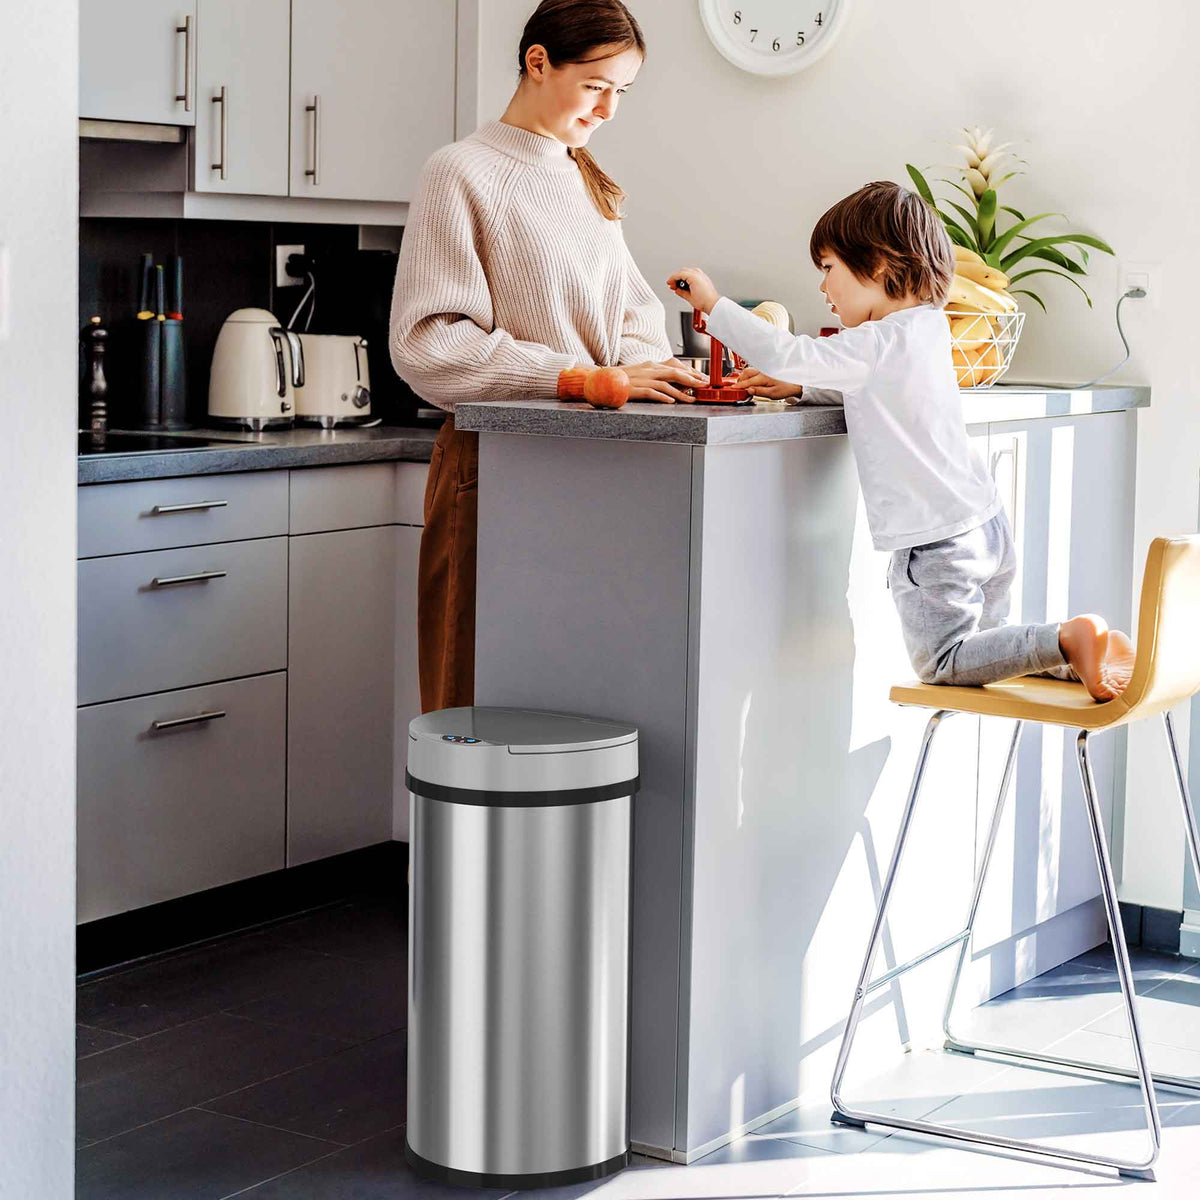 13 Gallon Semi-Round Stainless Steel Sensor Trash Can with Odor Filter in kitchen